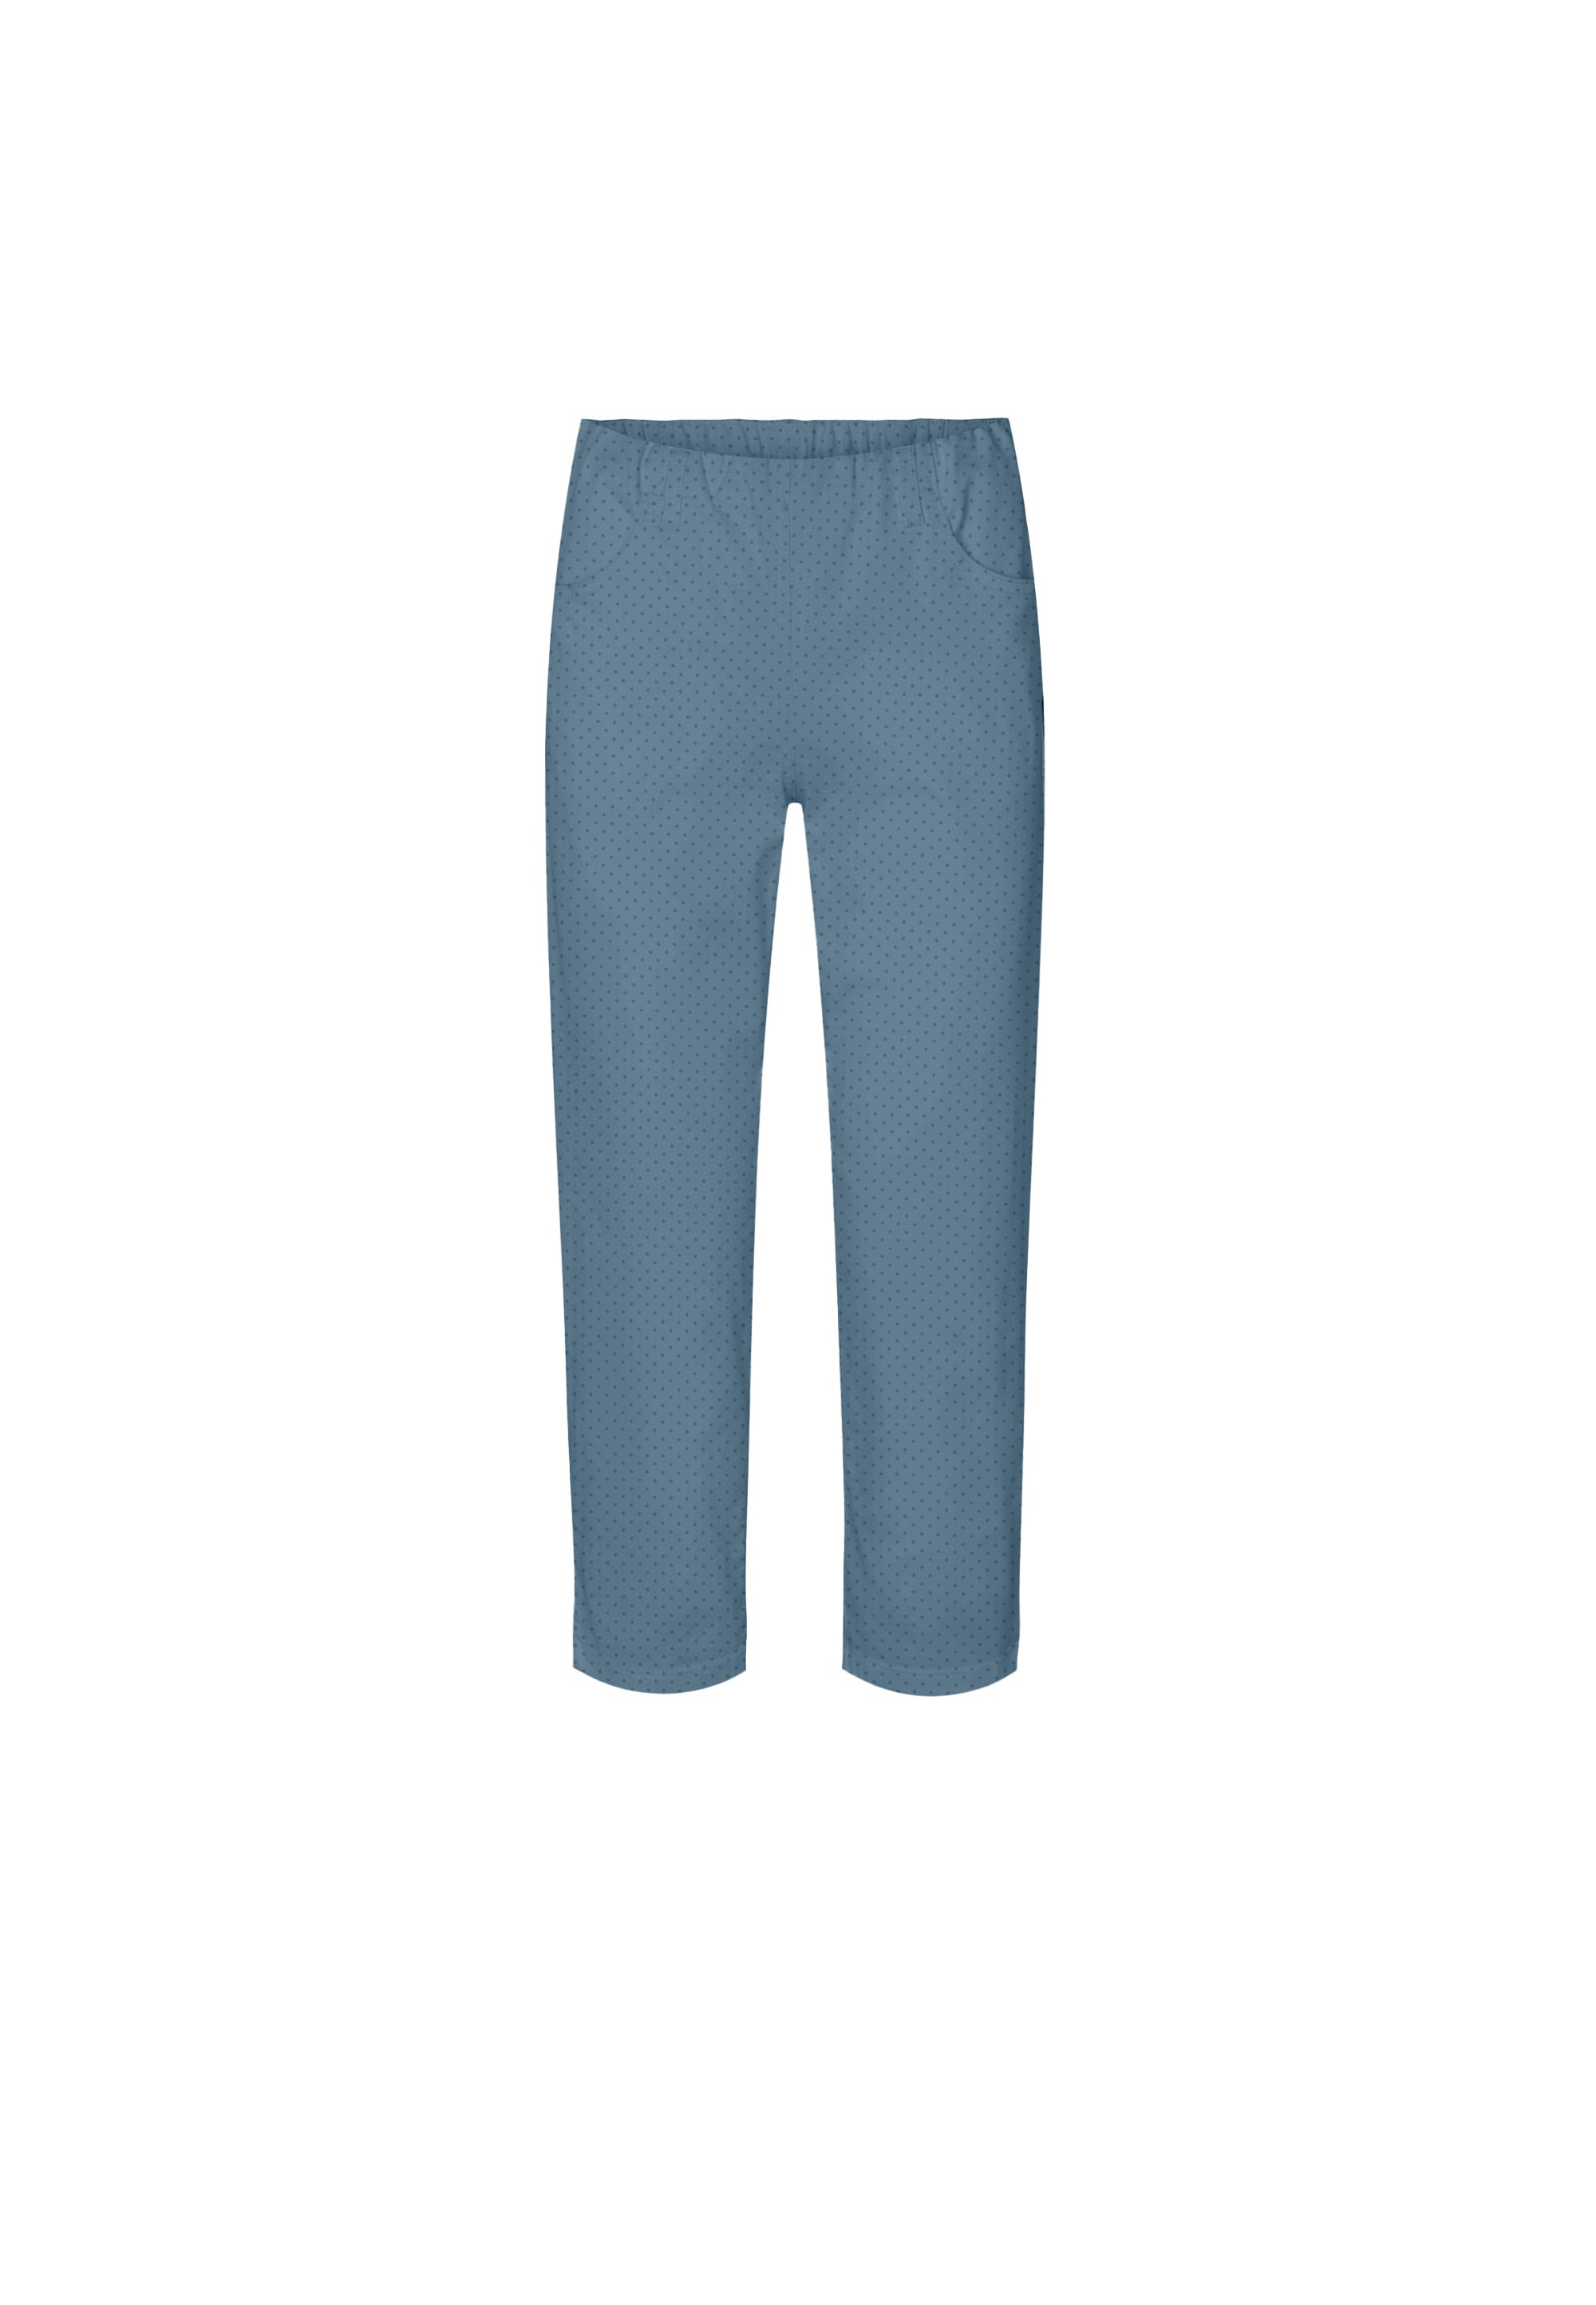 LAURIE Kelly - Crop Trousers REGULAR 43005 Faded Blue Print